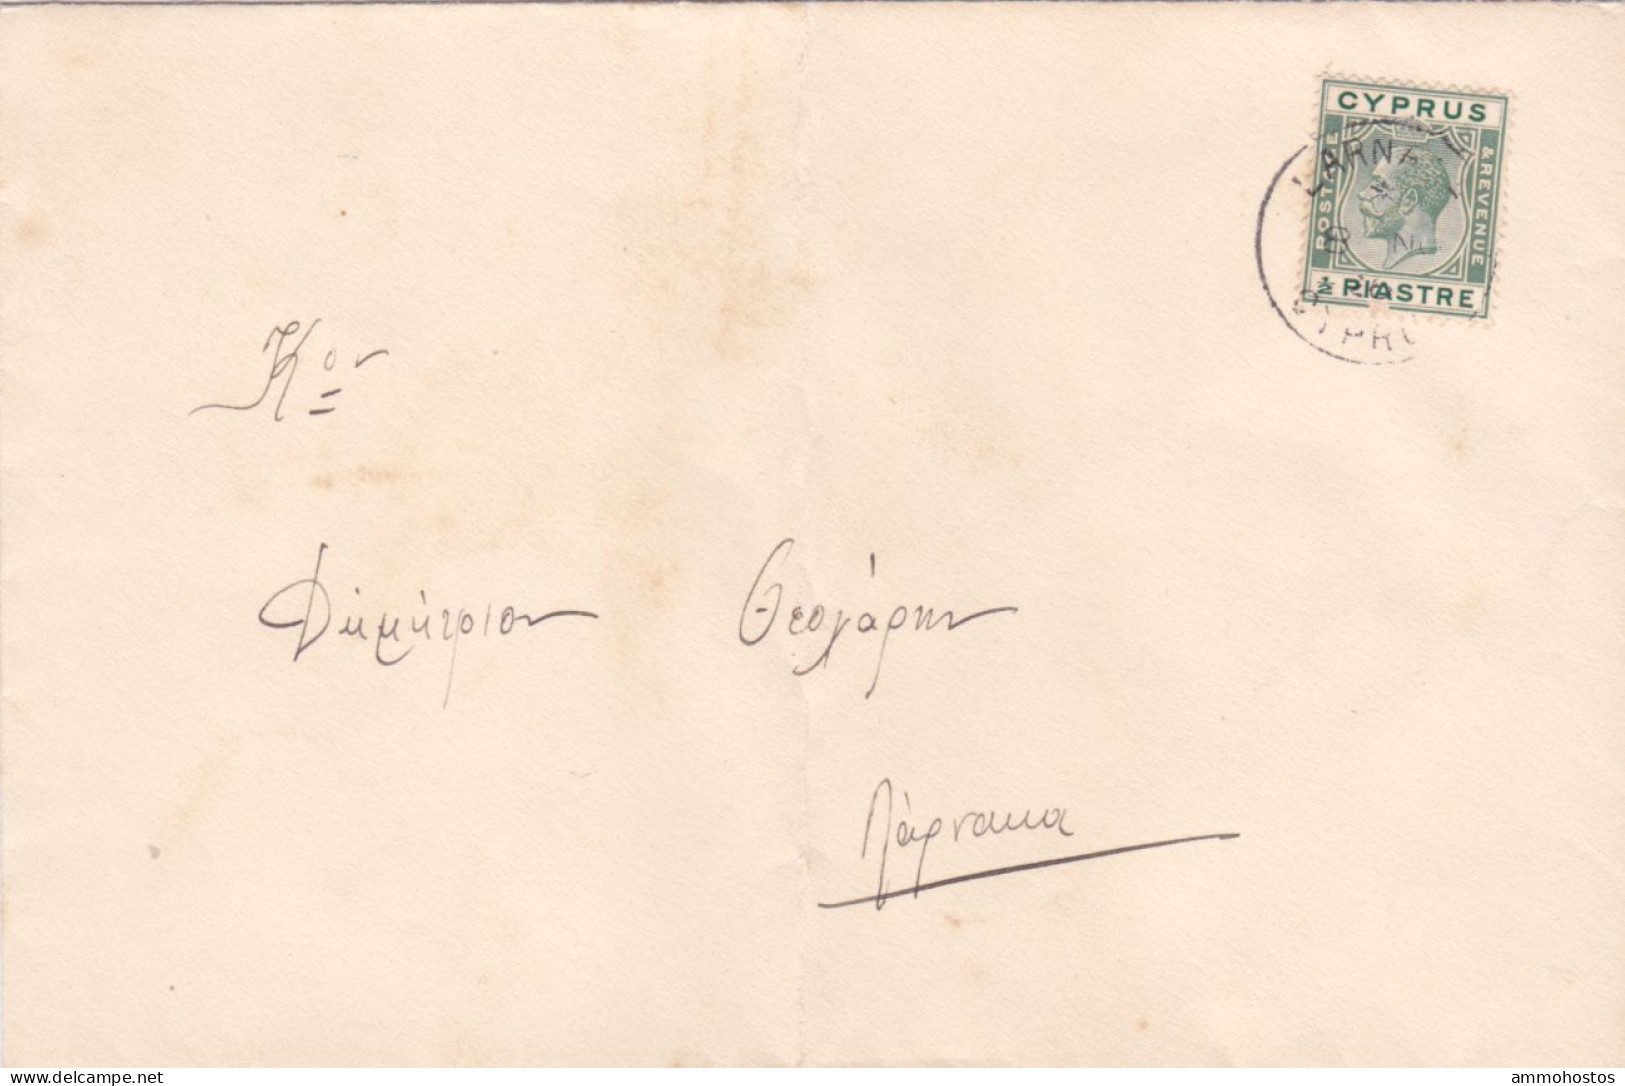 CYPRUS KGV LOCAL COVER LARNACA 1/2 PIASTRE RATE - Cyprus (...-1960)